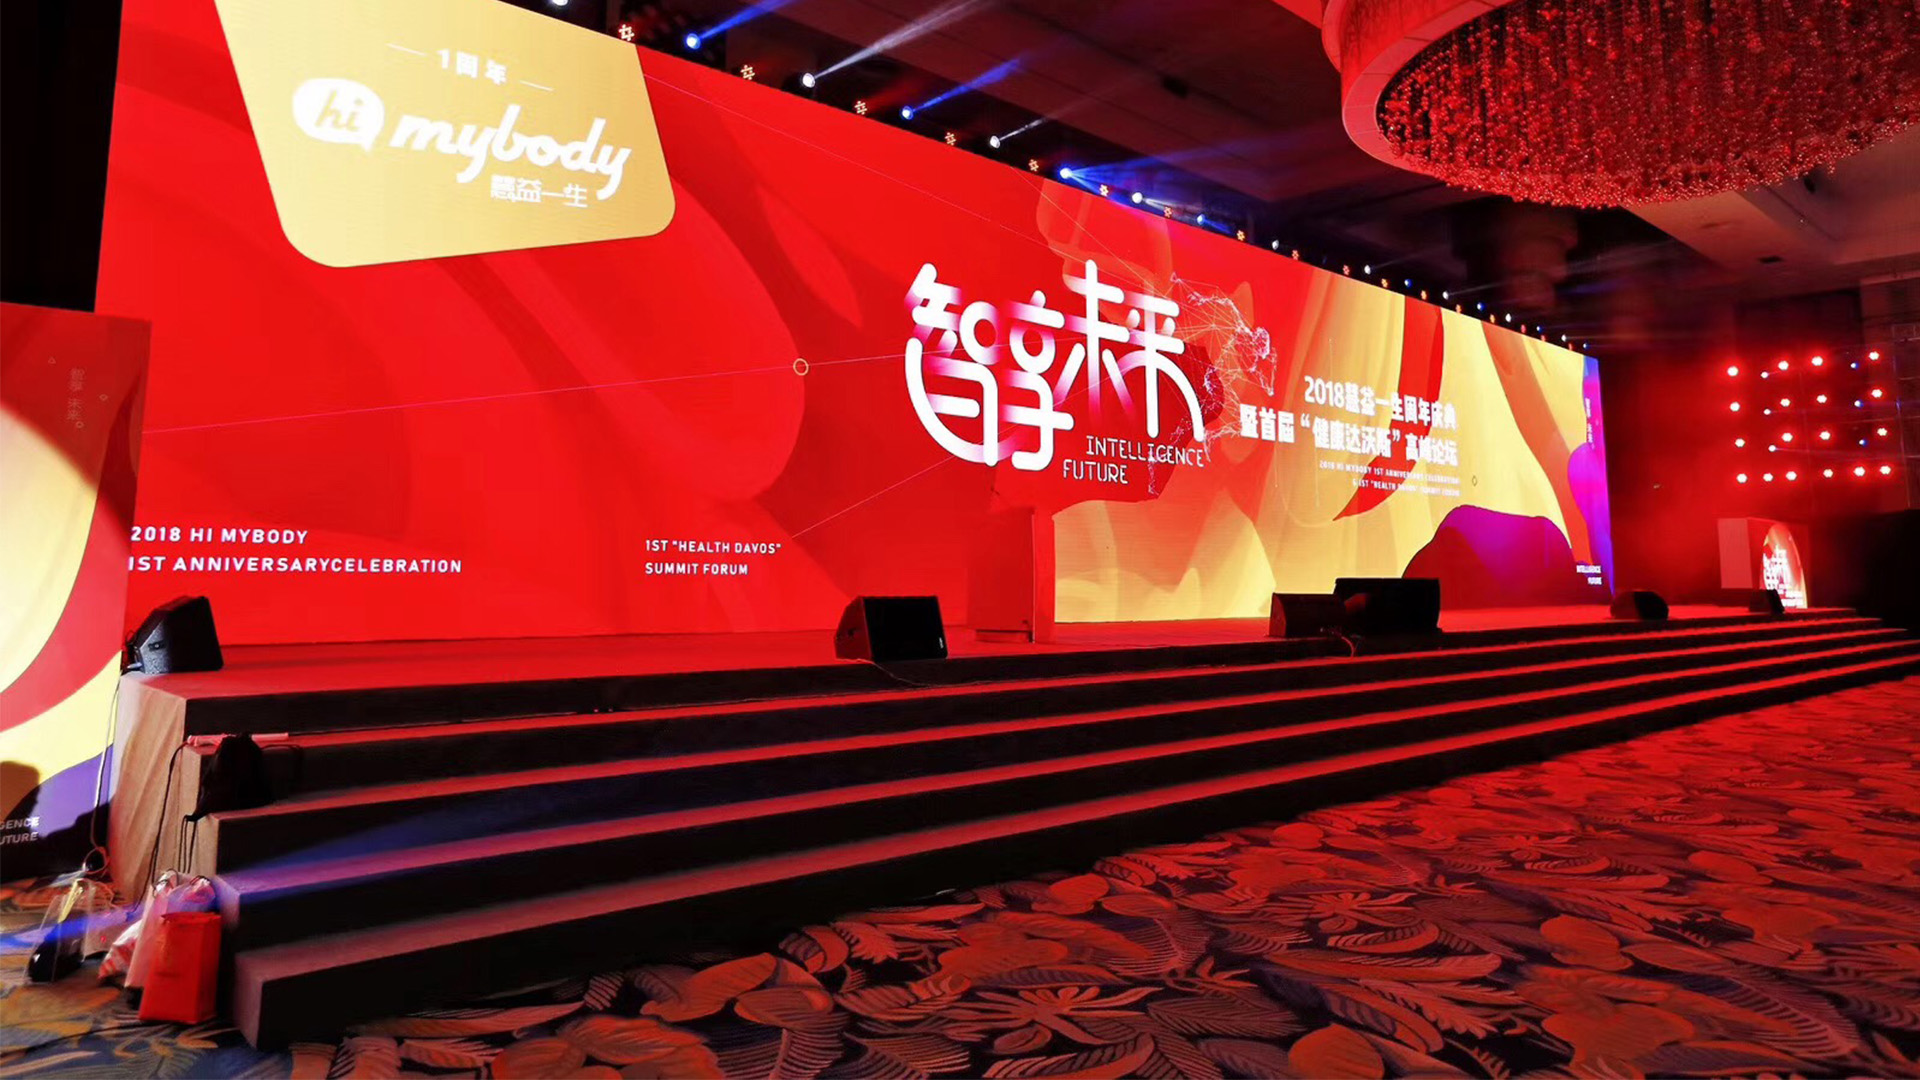 It is an Conference Event and Launching Event for Intelligence Future by D2 Studio Event Planner Event Agency Event Planner Hong Kong and Guangzhou China who does Event Planning for Conference Event and Launching Event 1